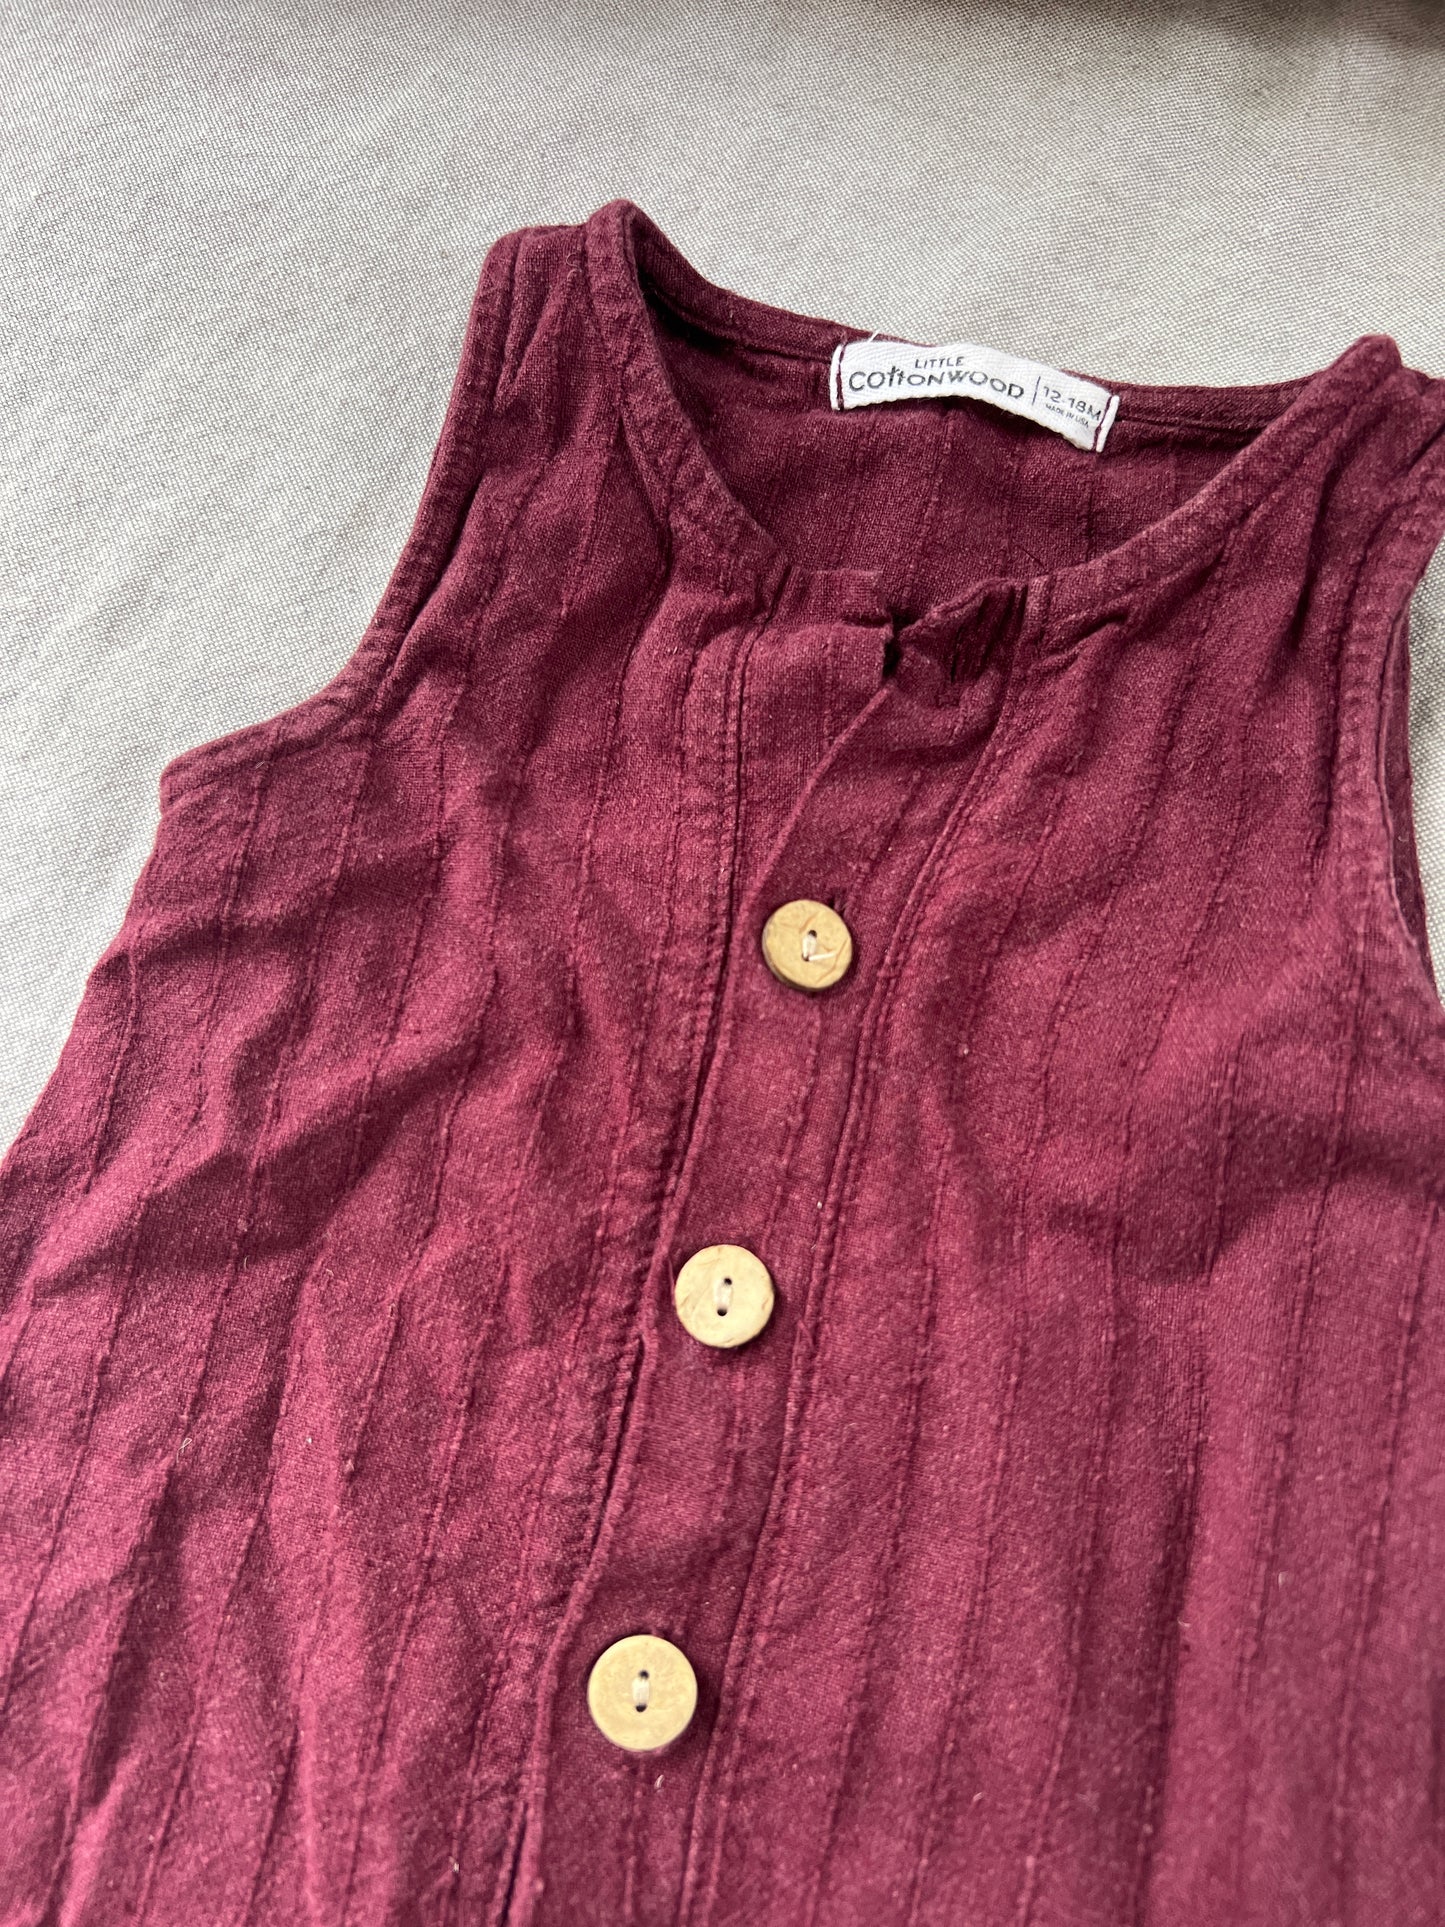 12-18mo Little Cottonwood jumper, unisex, play condition